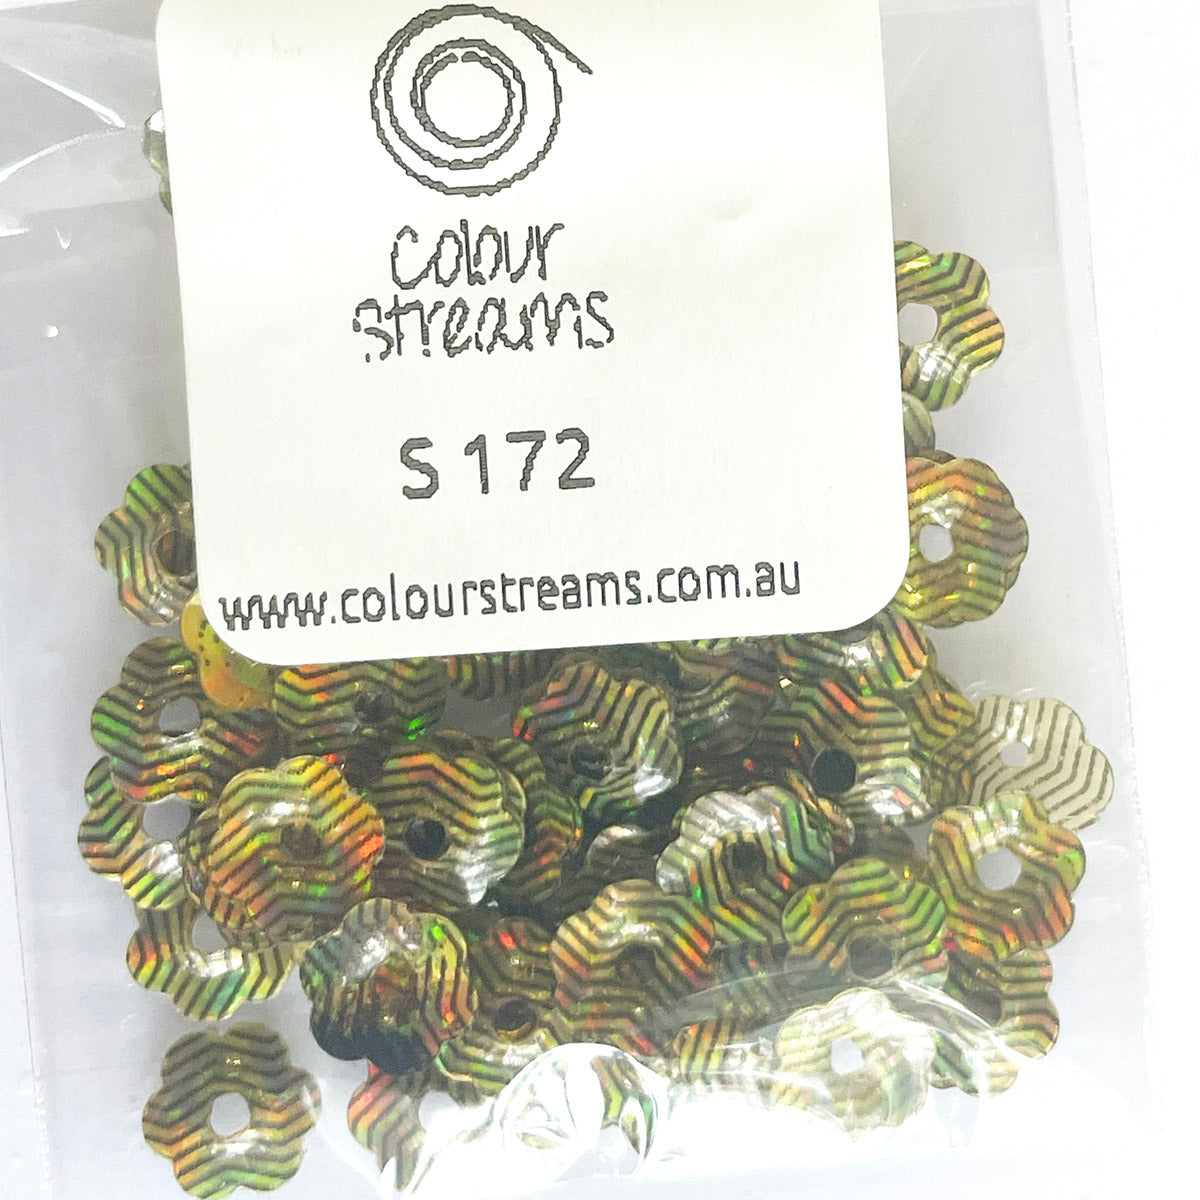 www.colourstreams.com.au Colour Streams Sequins Embellishments Stitching Embroidery Textile Arts Costumes Mardi Gras Dancing Ballet Theatre Shows Drag Queen Bling Reflective Iridescent 6mm Flower Matte Gold with Black Lines and Red Lights S172